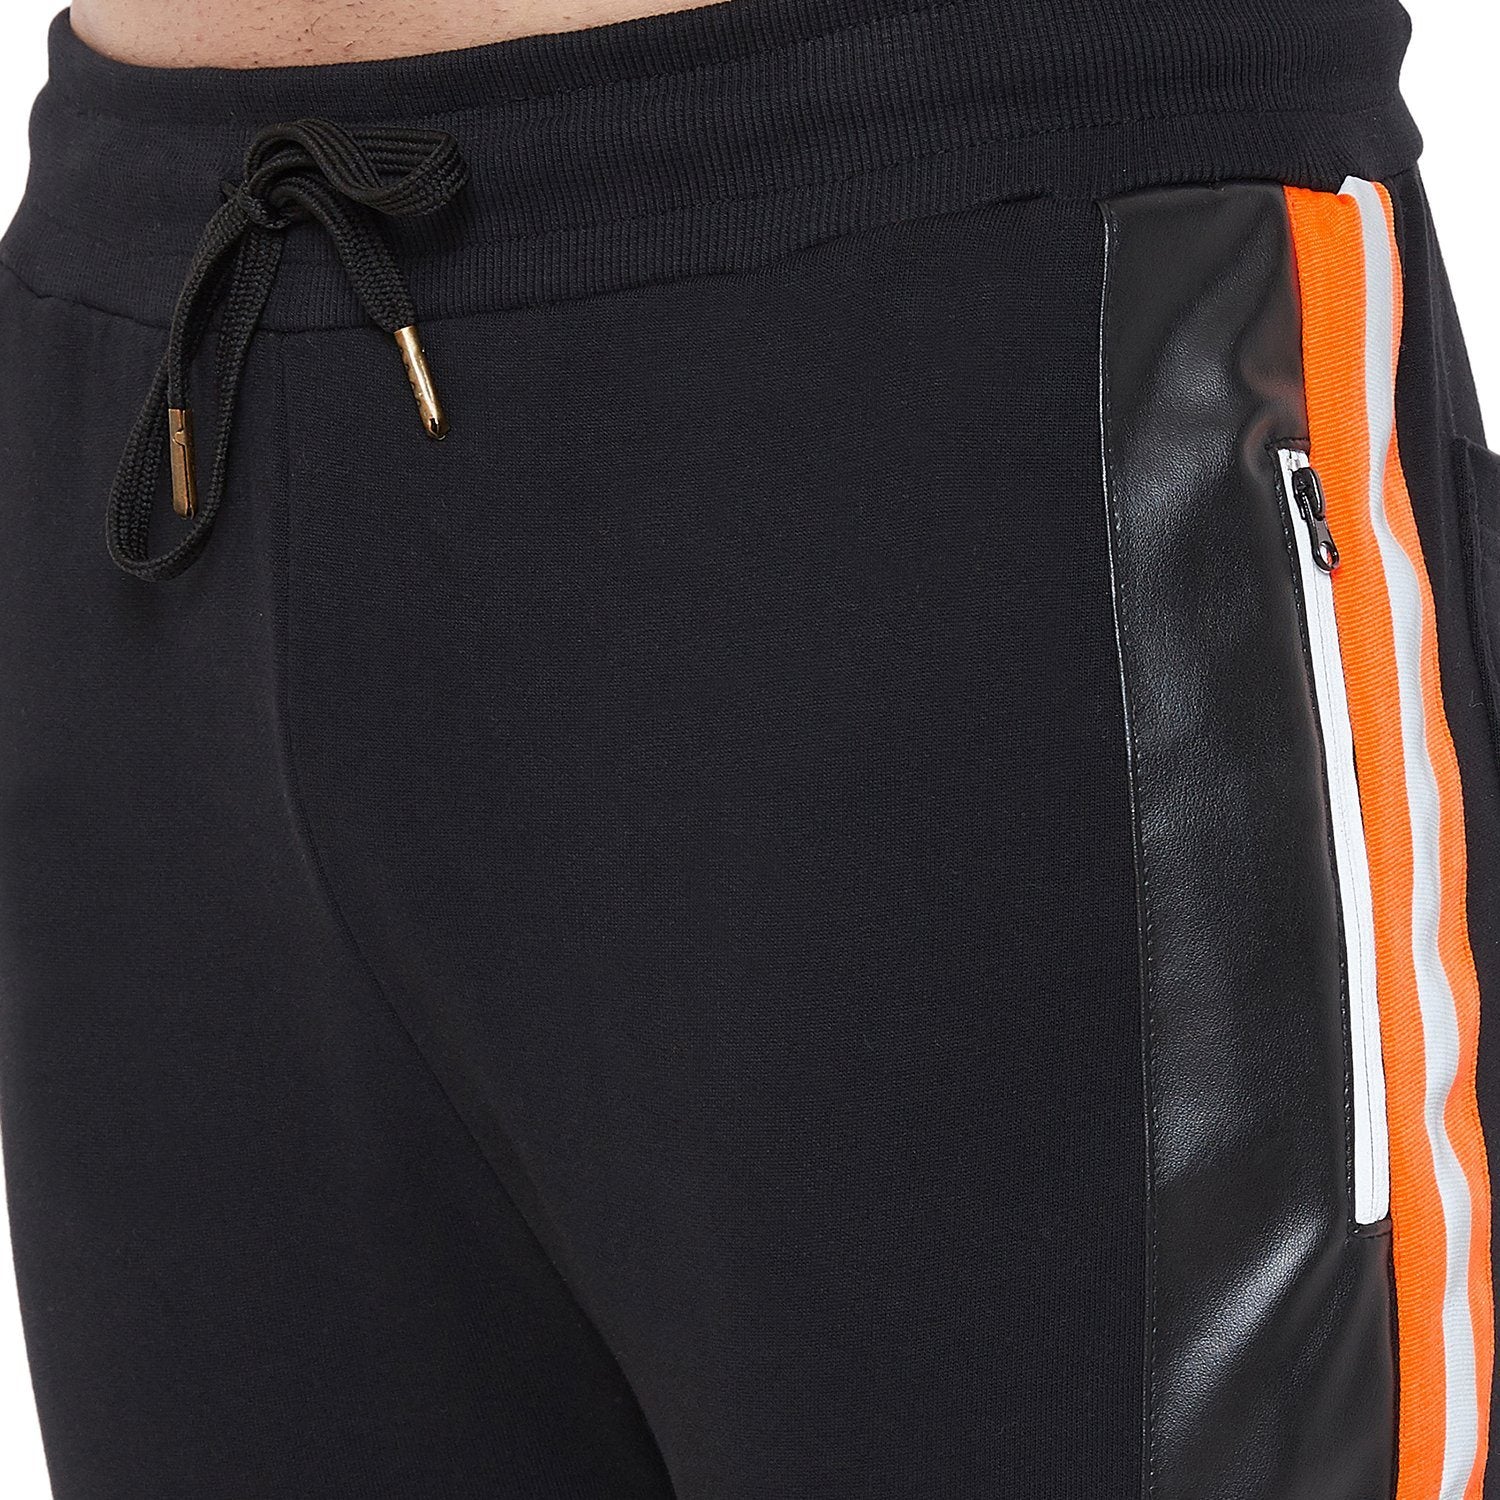 New Mens Stylish Slim Fit Lower Track pant with Orange Strips